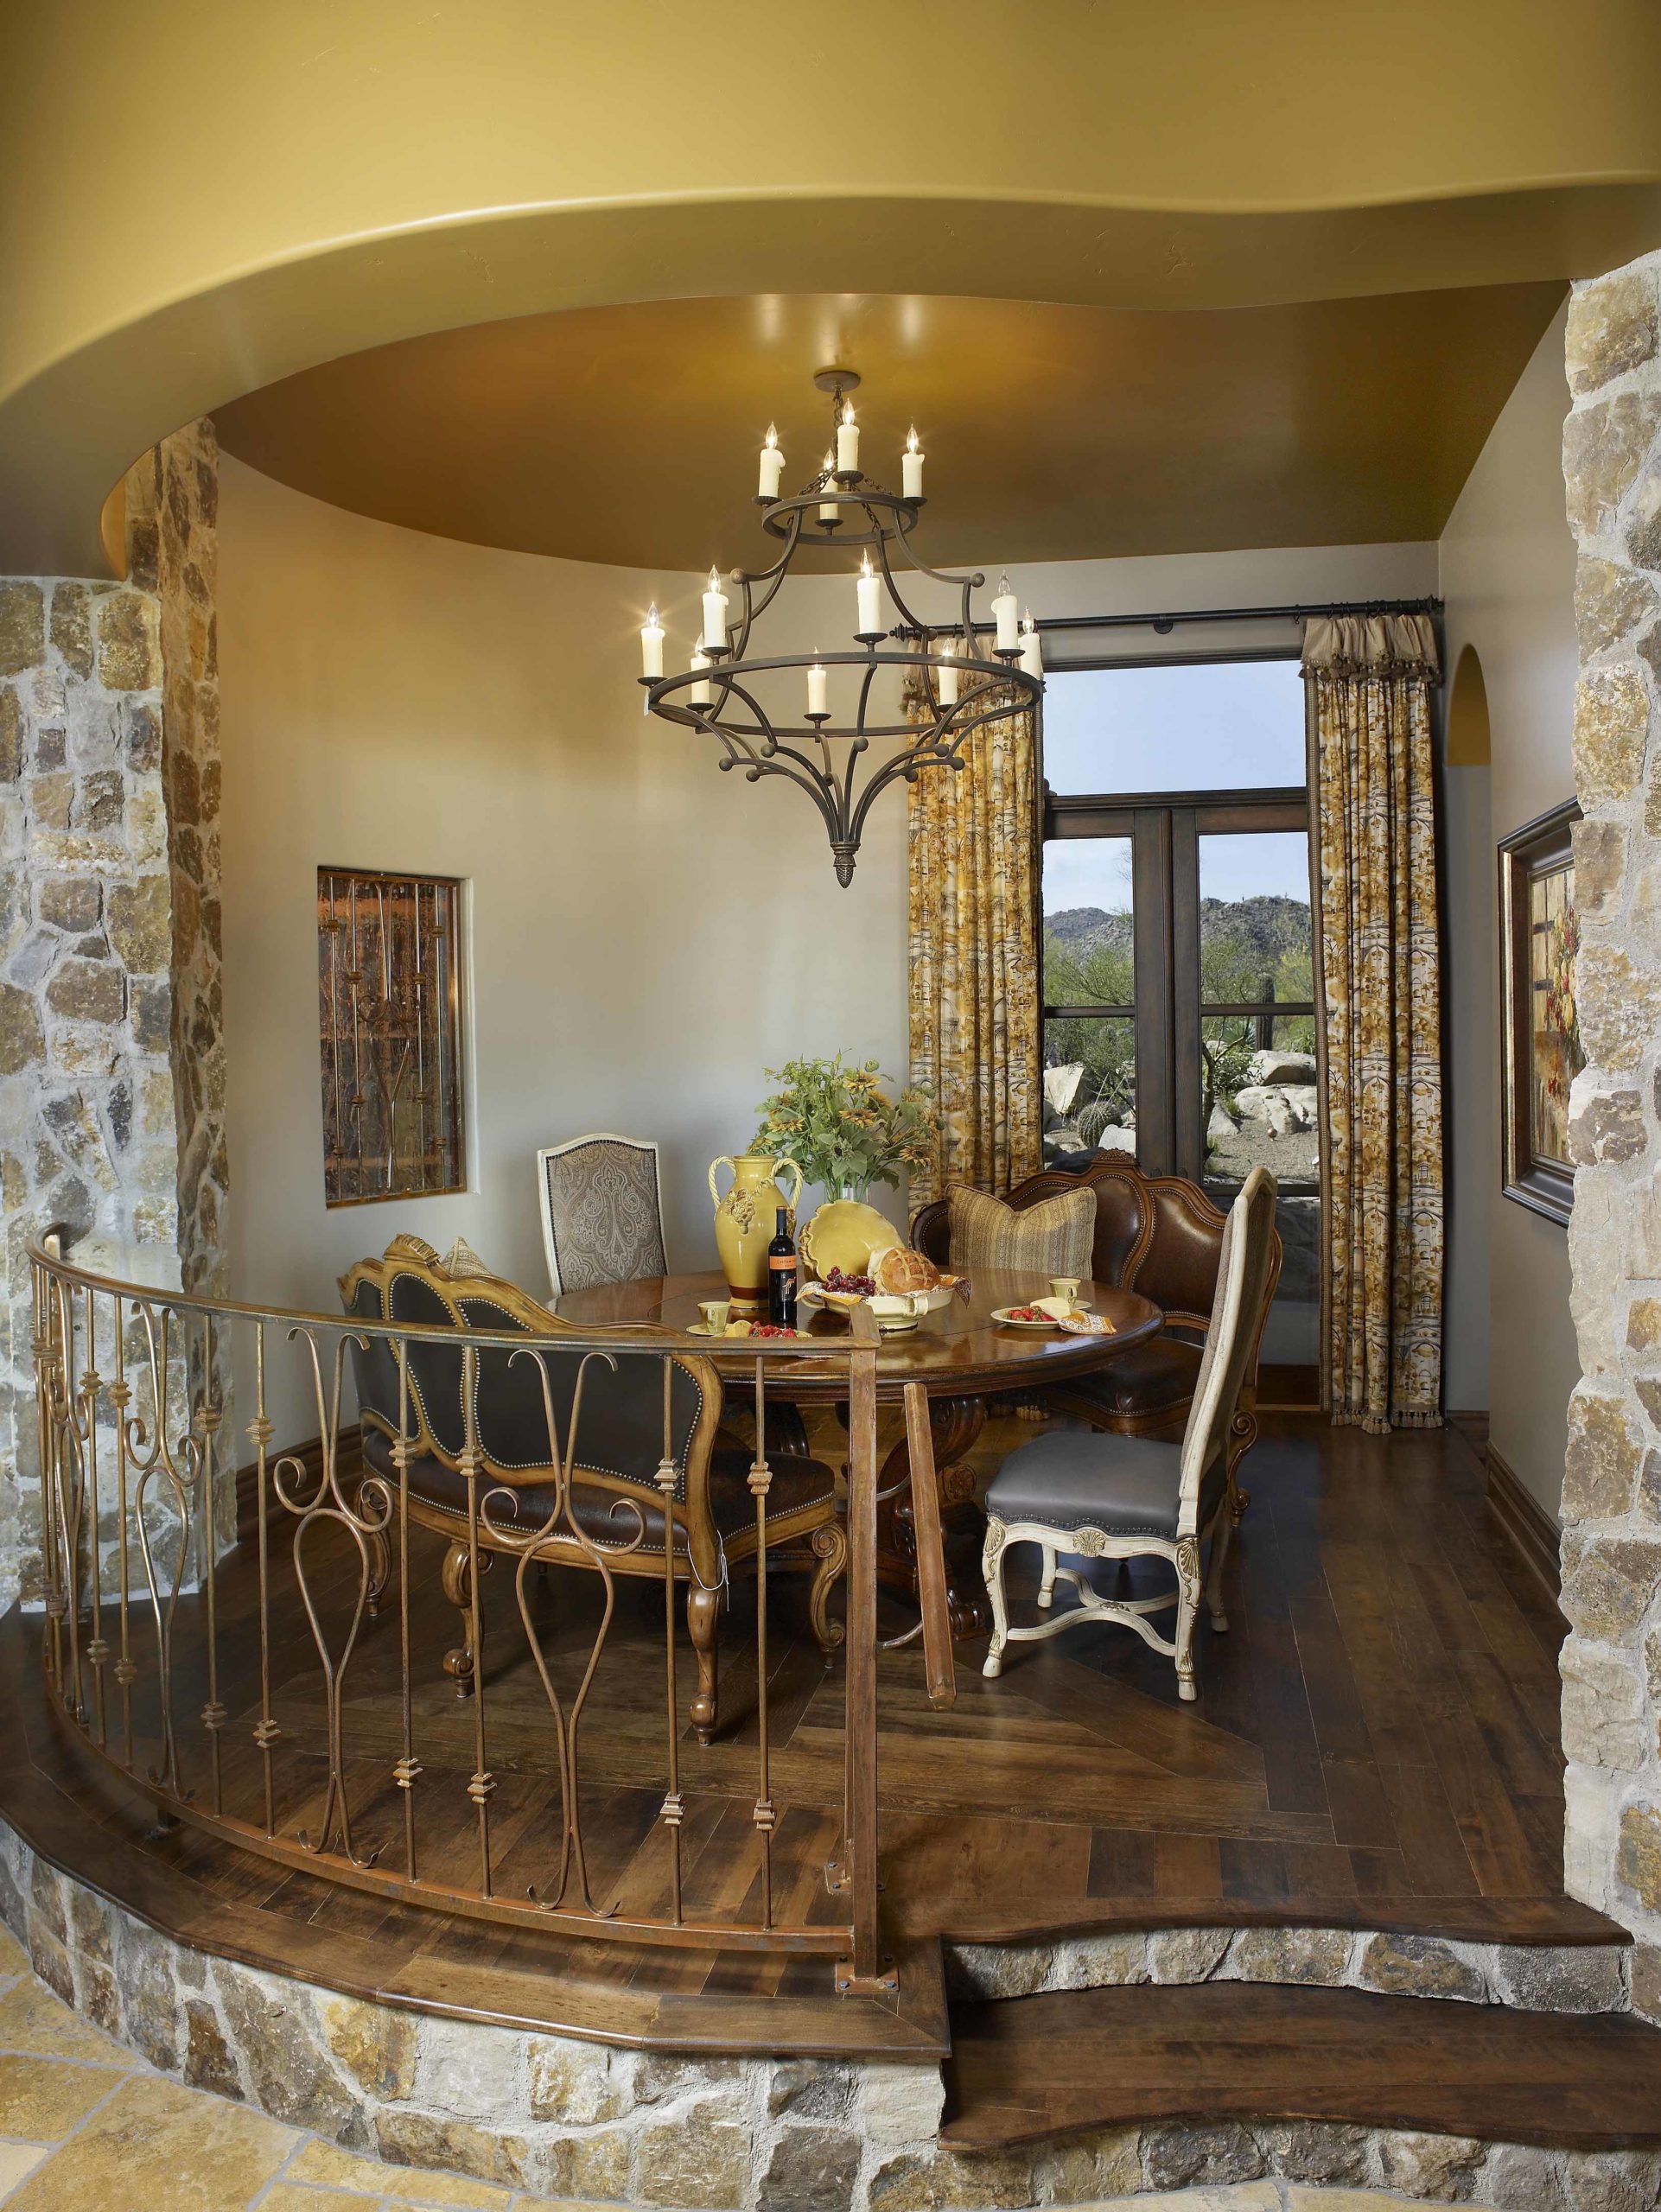 Small dining room up a couple stairs with stone wall accents in front of a window